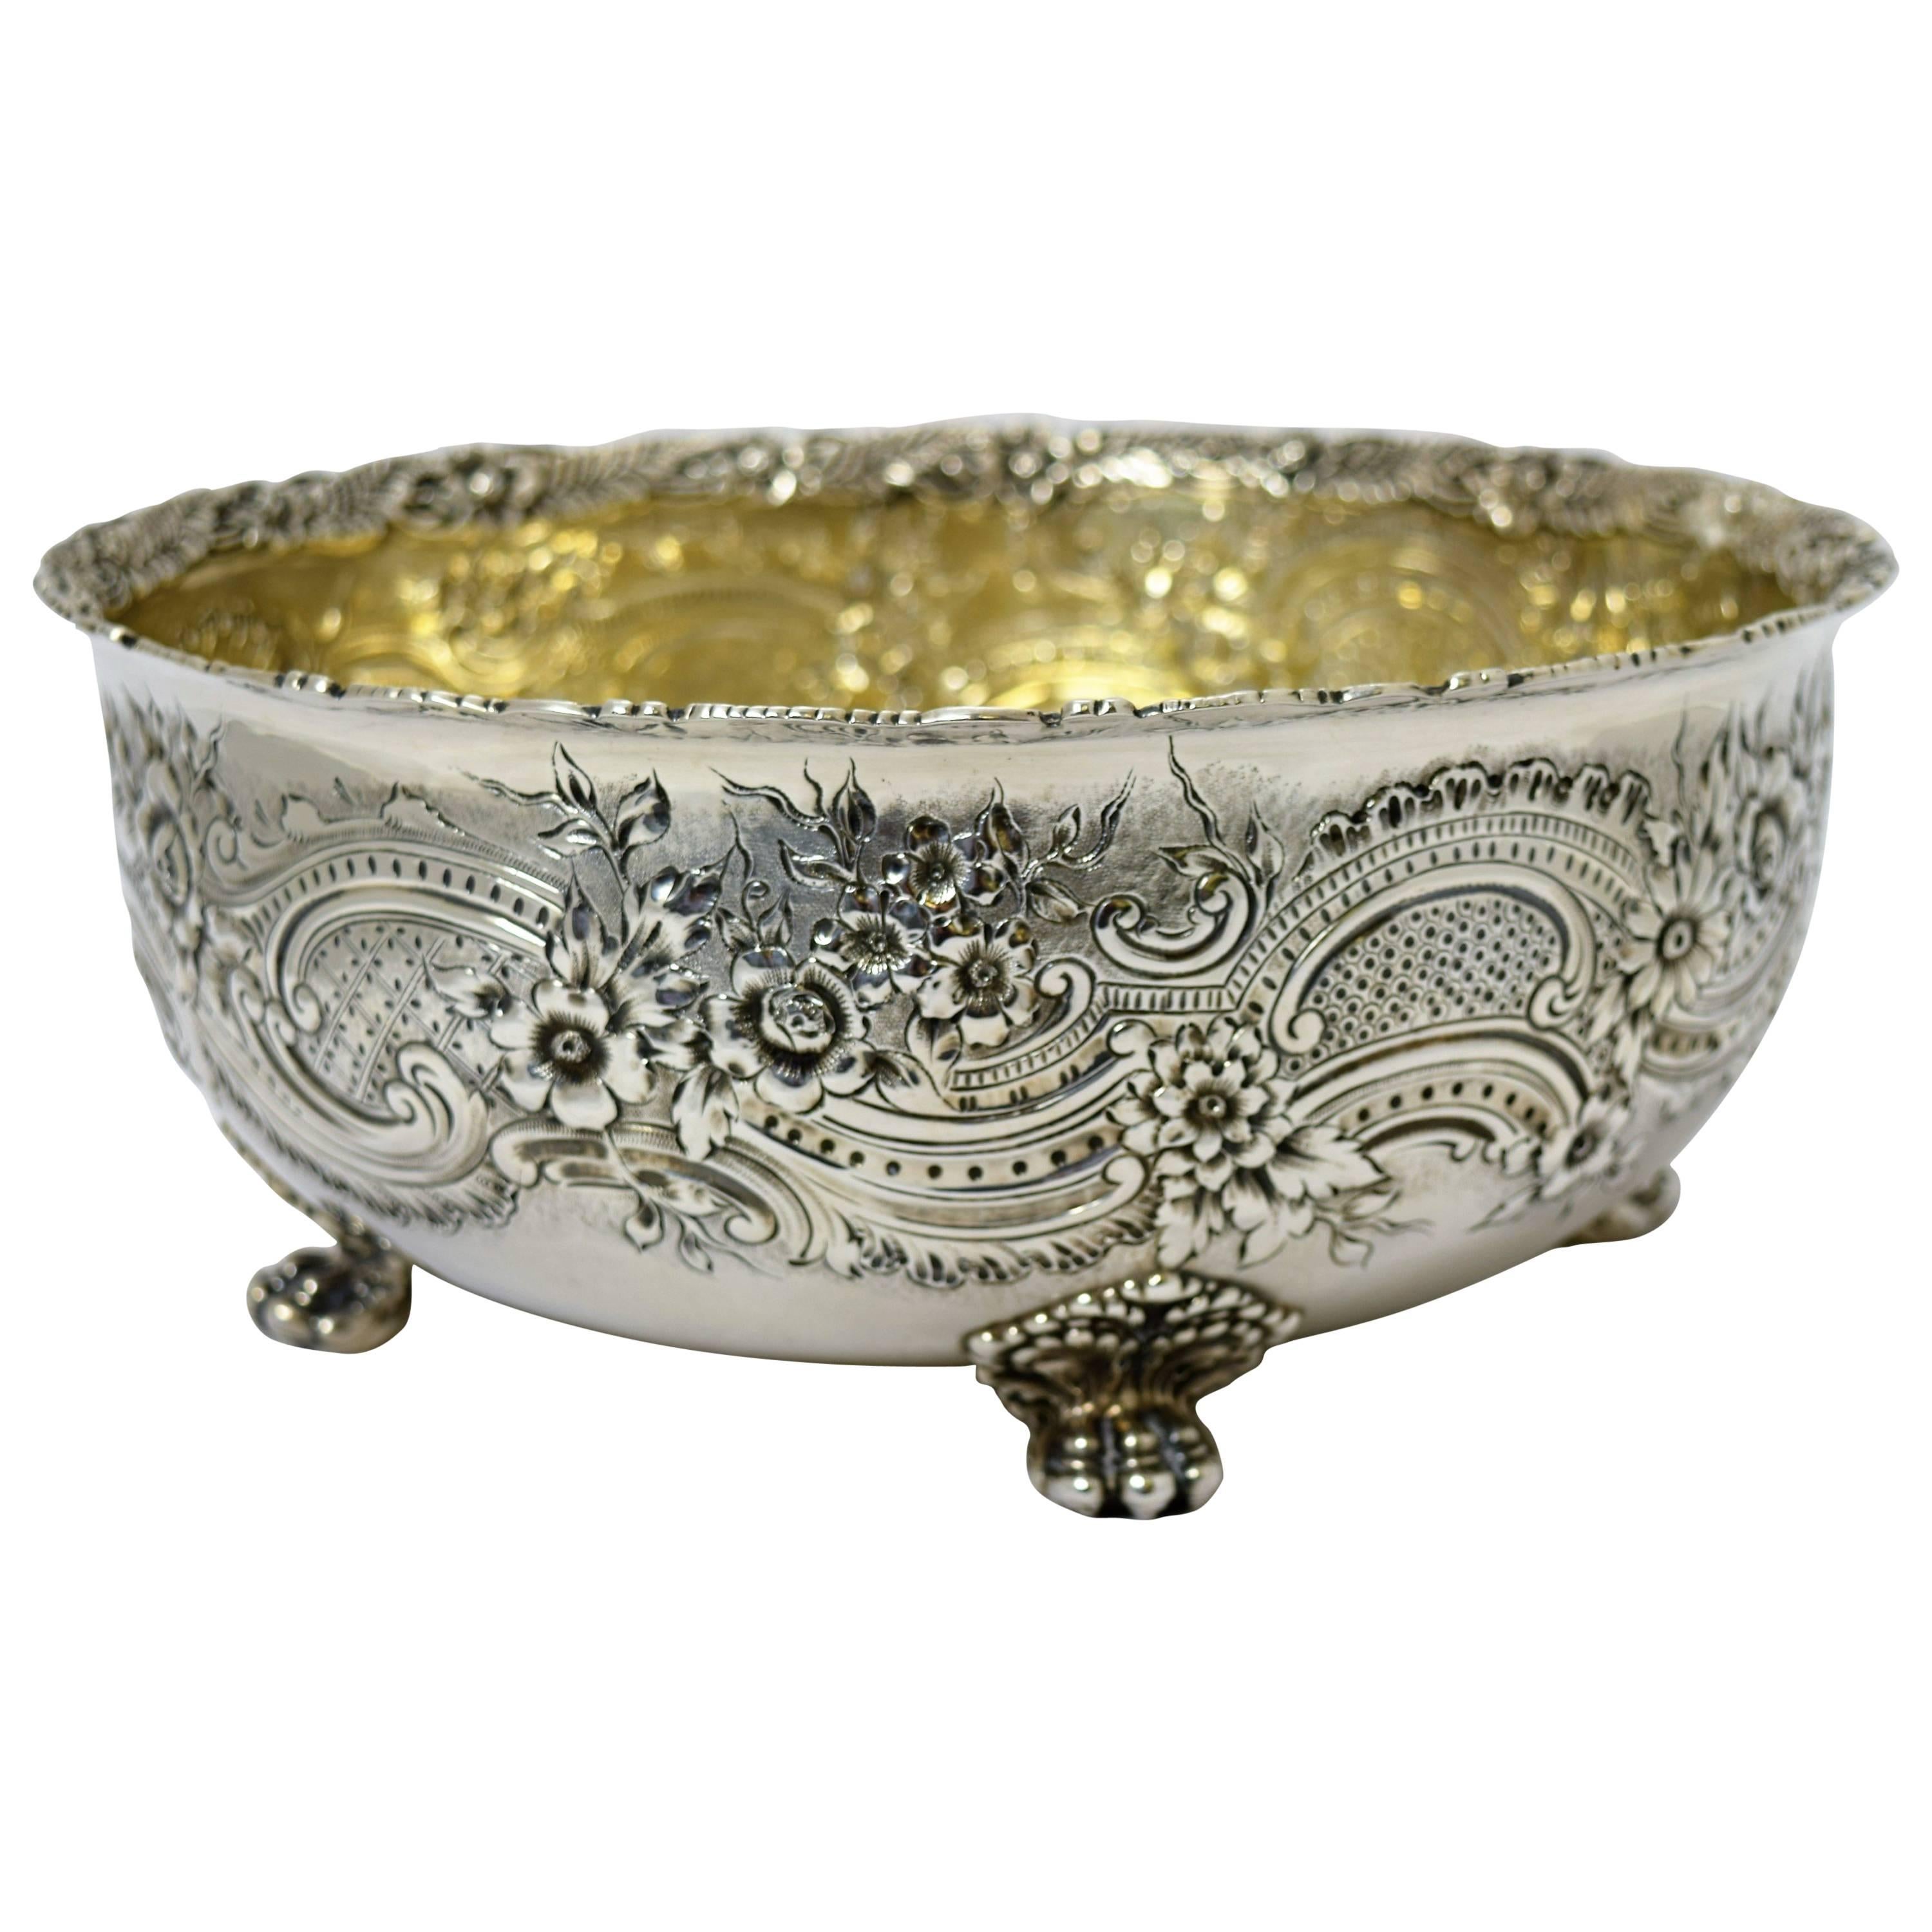 Tiffany Sterling Silver Floral Embossed Bowl with Paw Feet